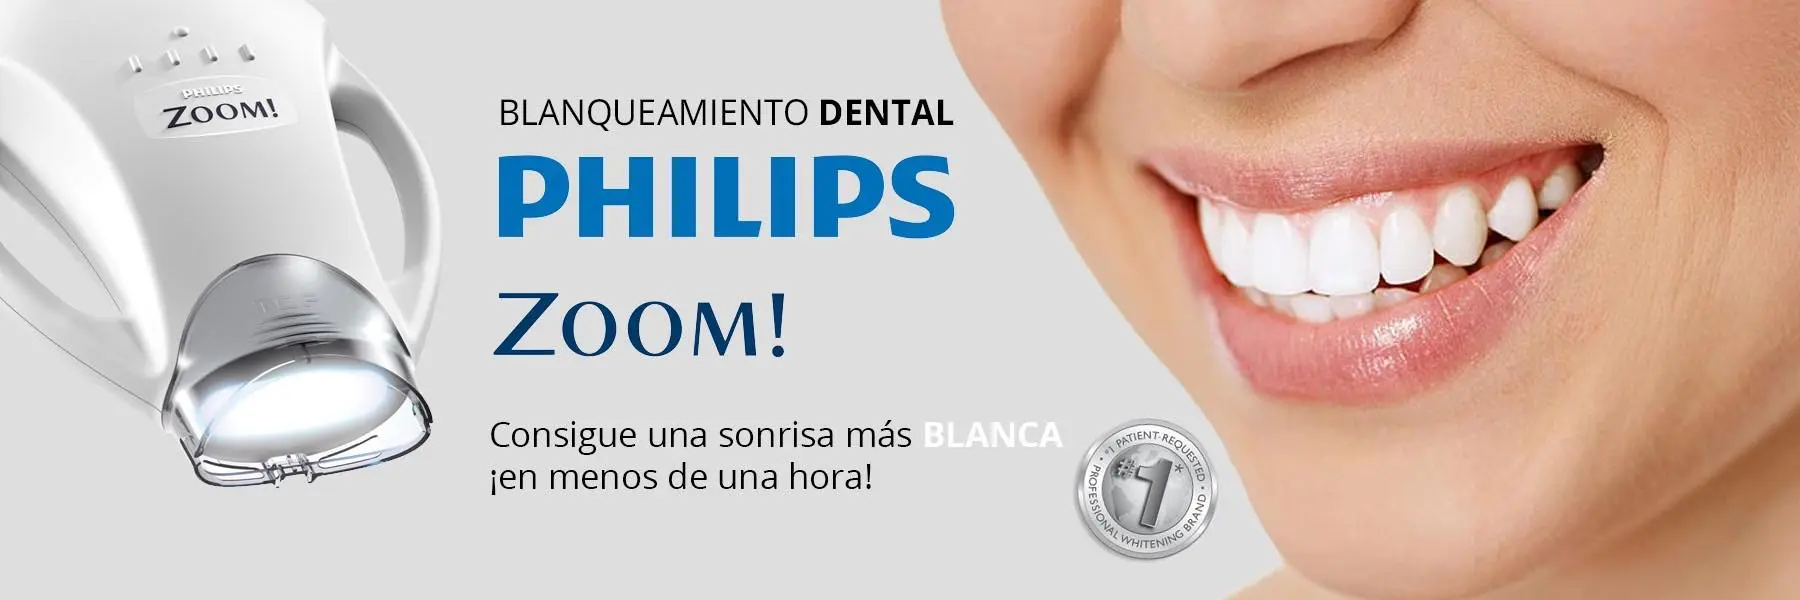 Blanqueamiento dental Philips Zoom